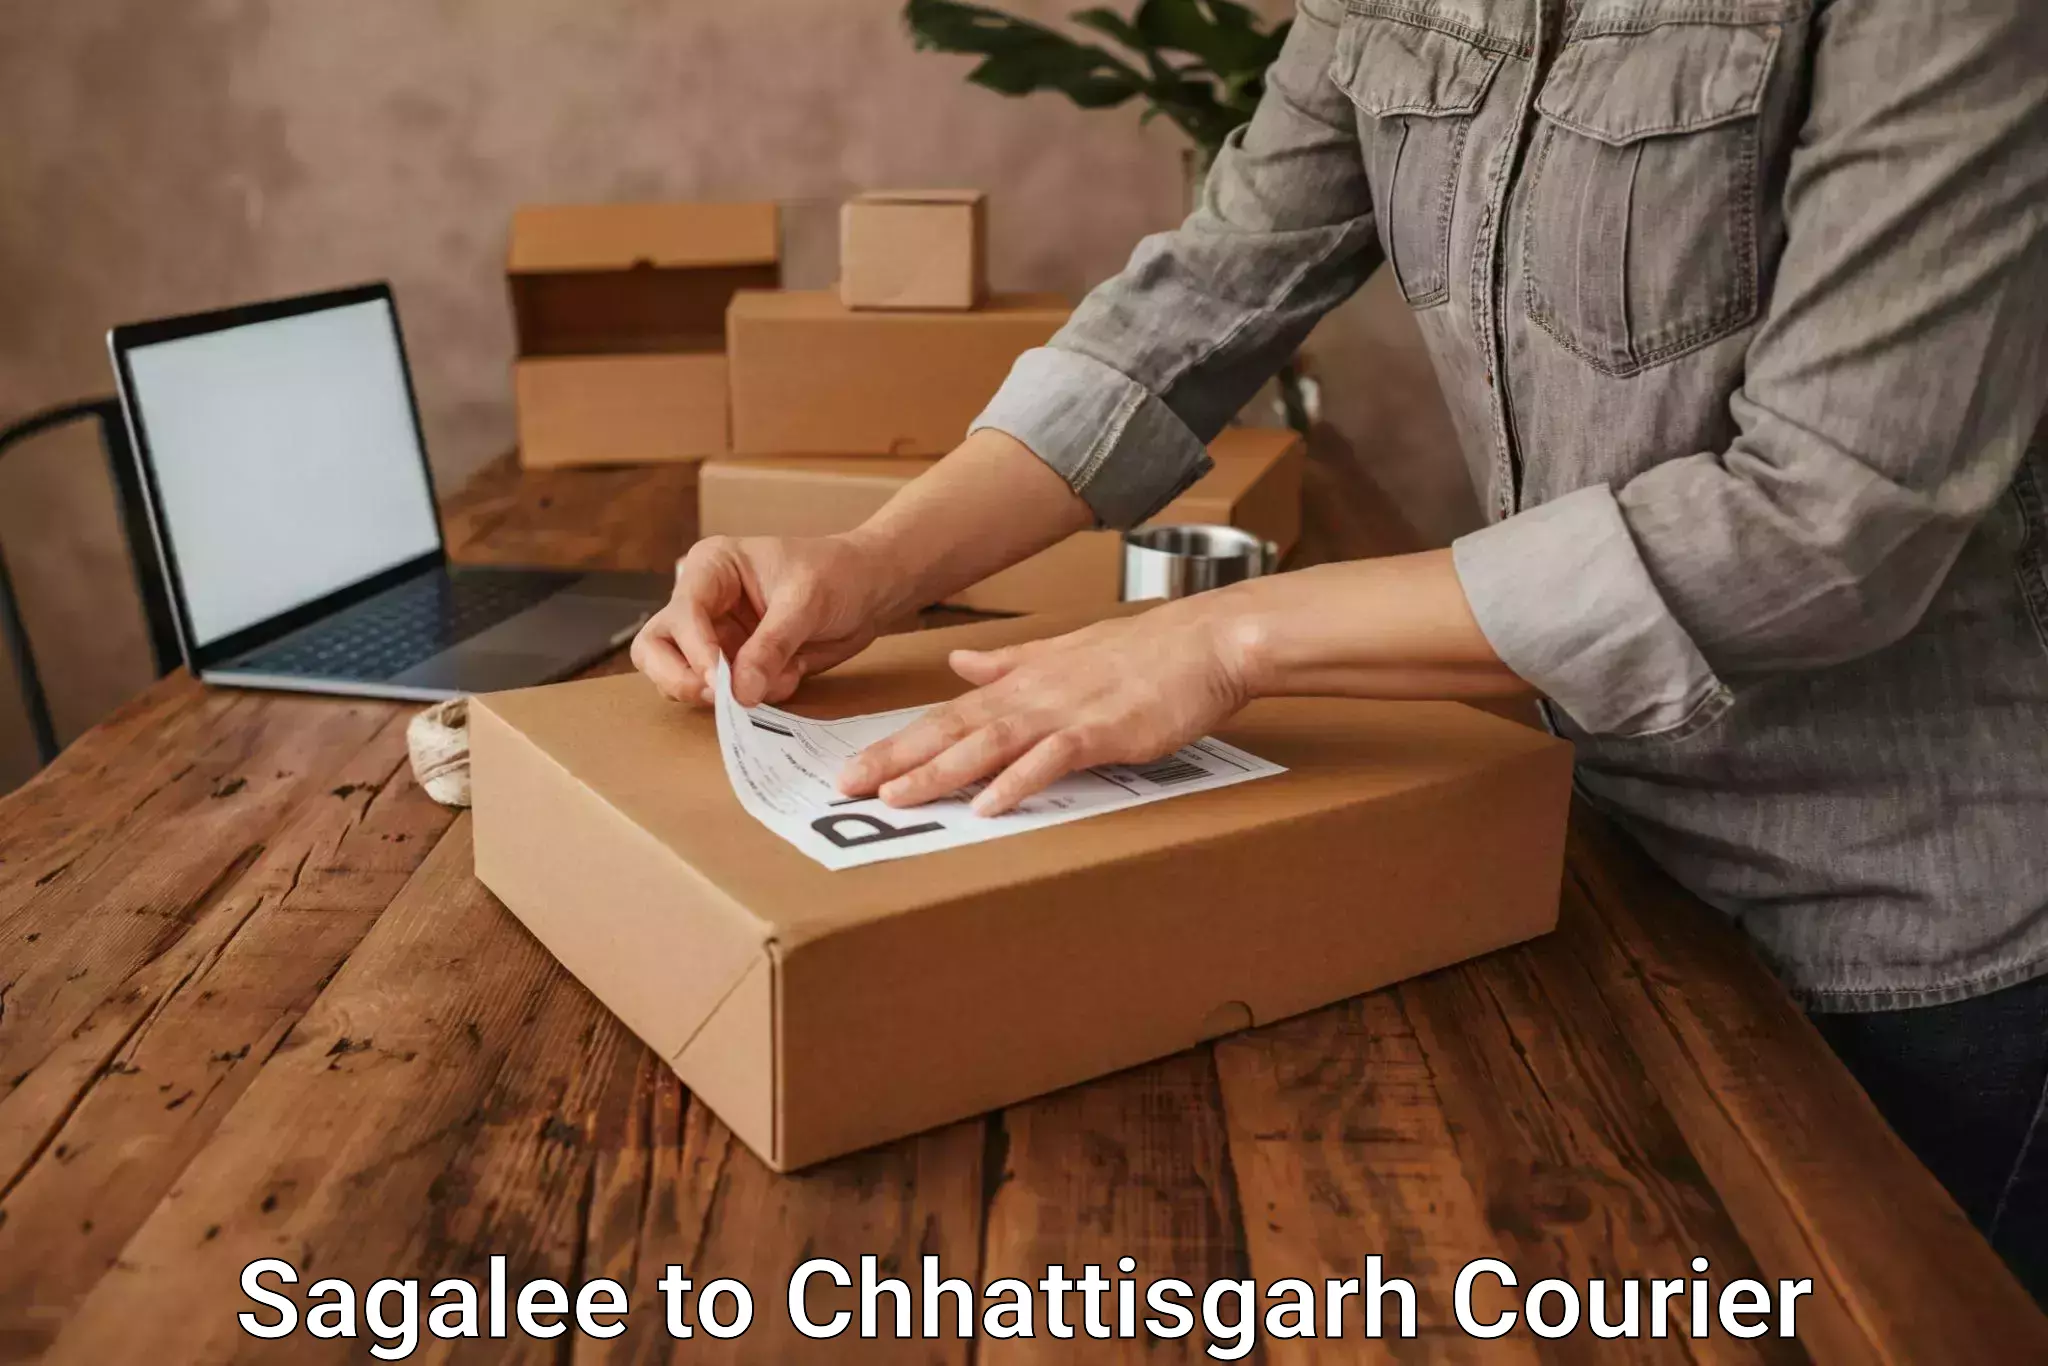 Subscription-based courier Sagalee to Nagri